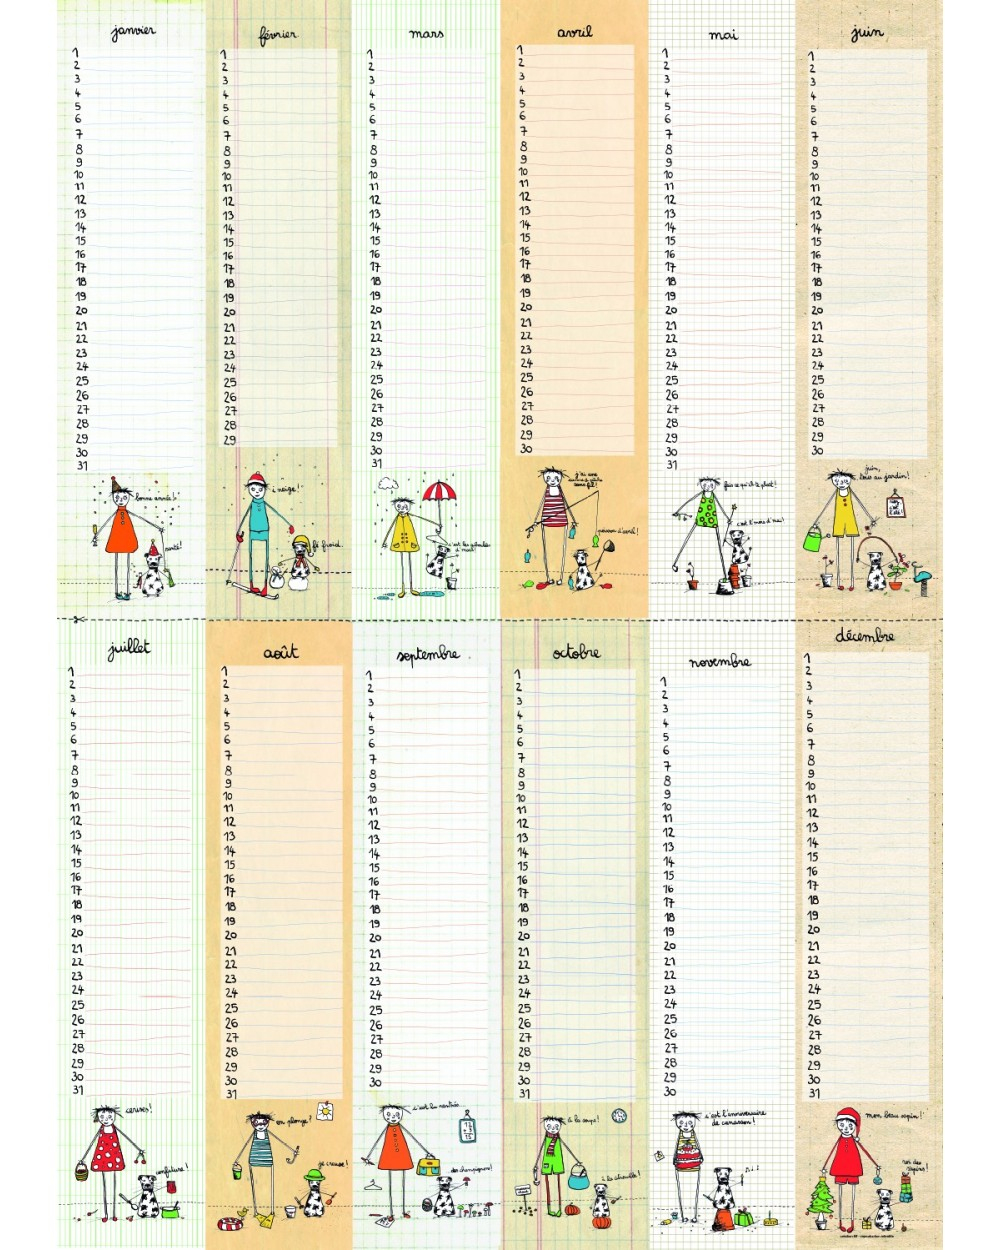 Calendrier Anniversaires Poster - Calendrier Perpétuel Filf destiné Calendrier Perpétuel À Imprimer